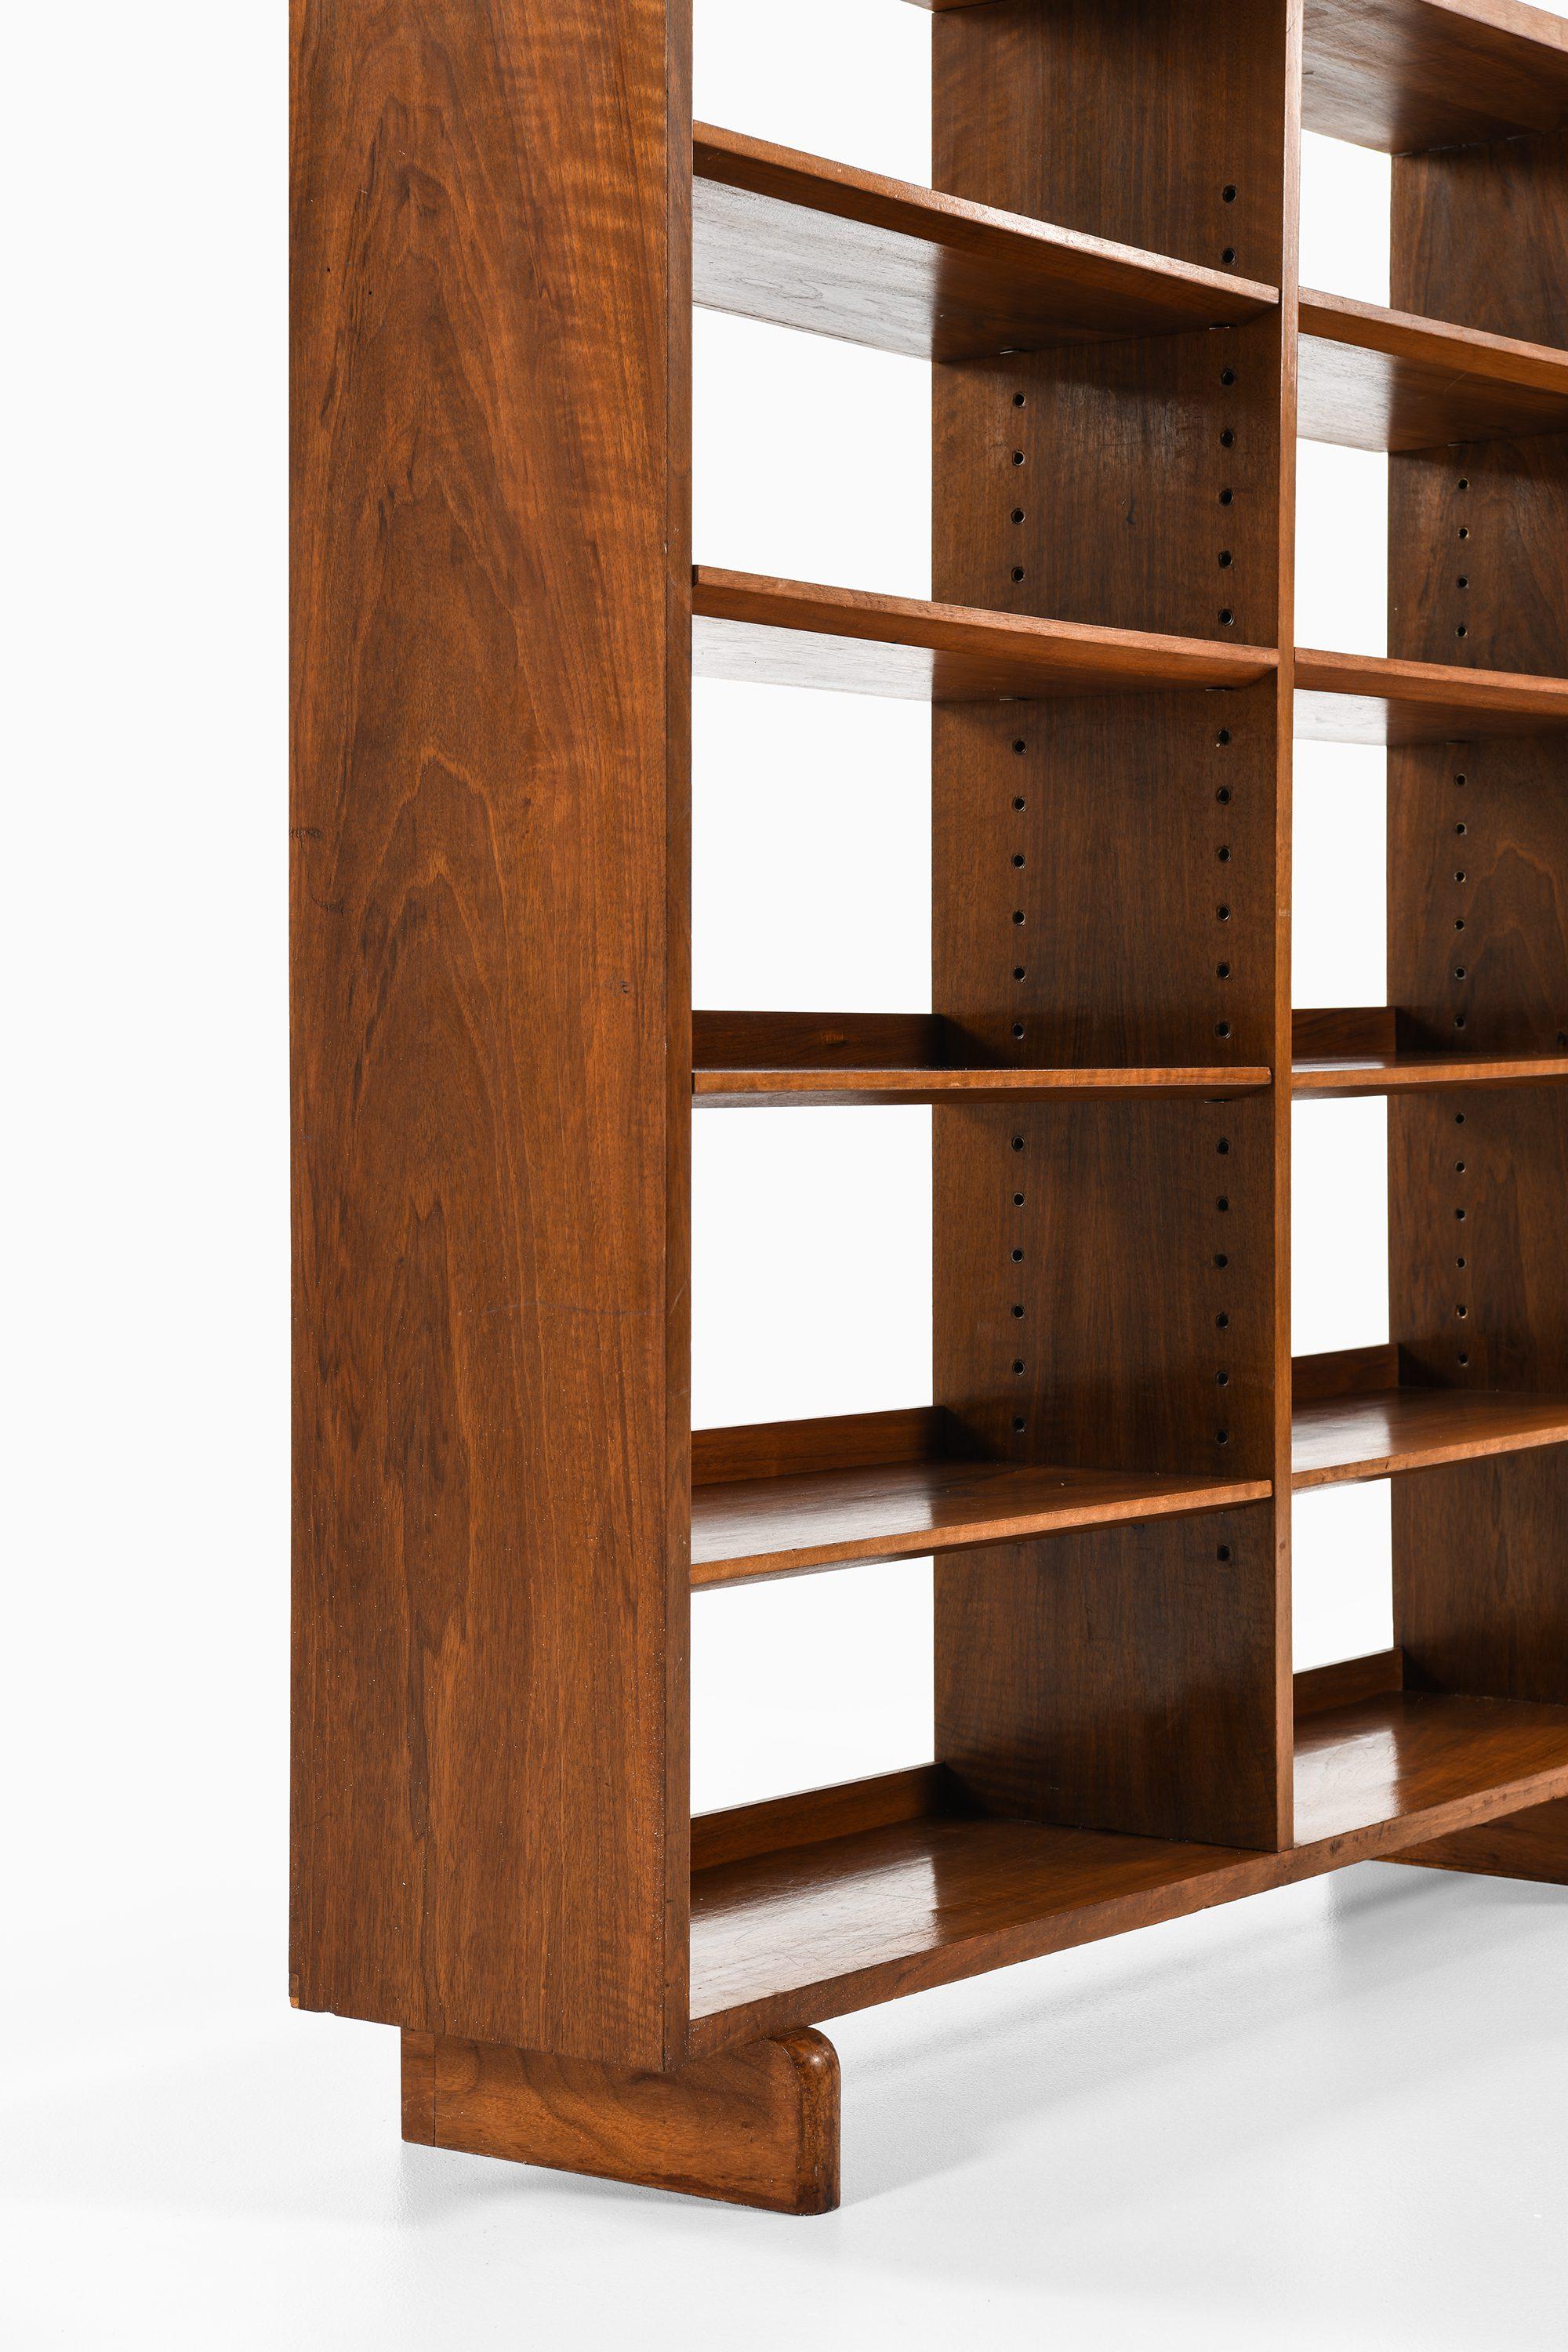 20th Century Rare Freestanding Bookcase in Mahogany by Josef Frank, 1940's For Sale